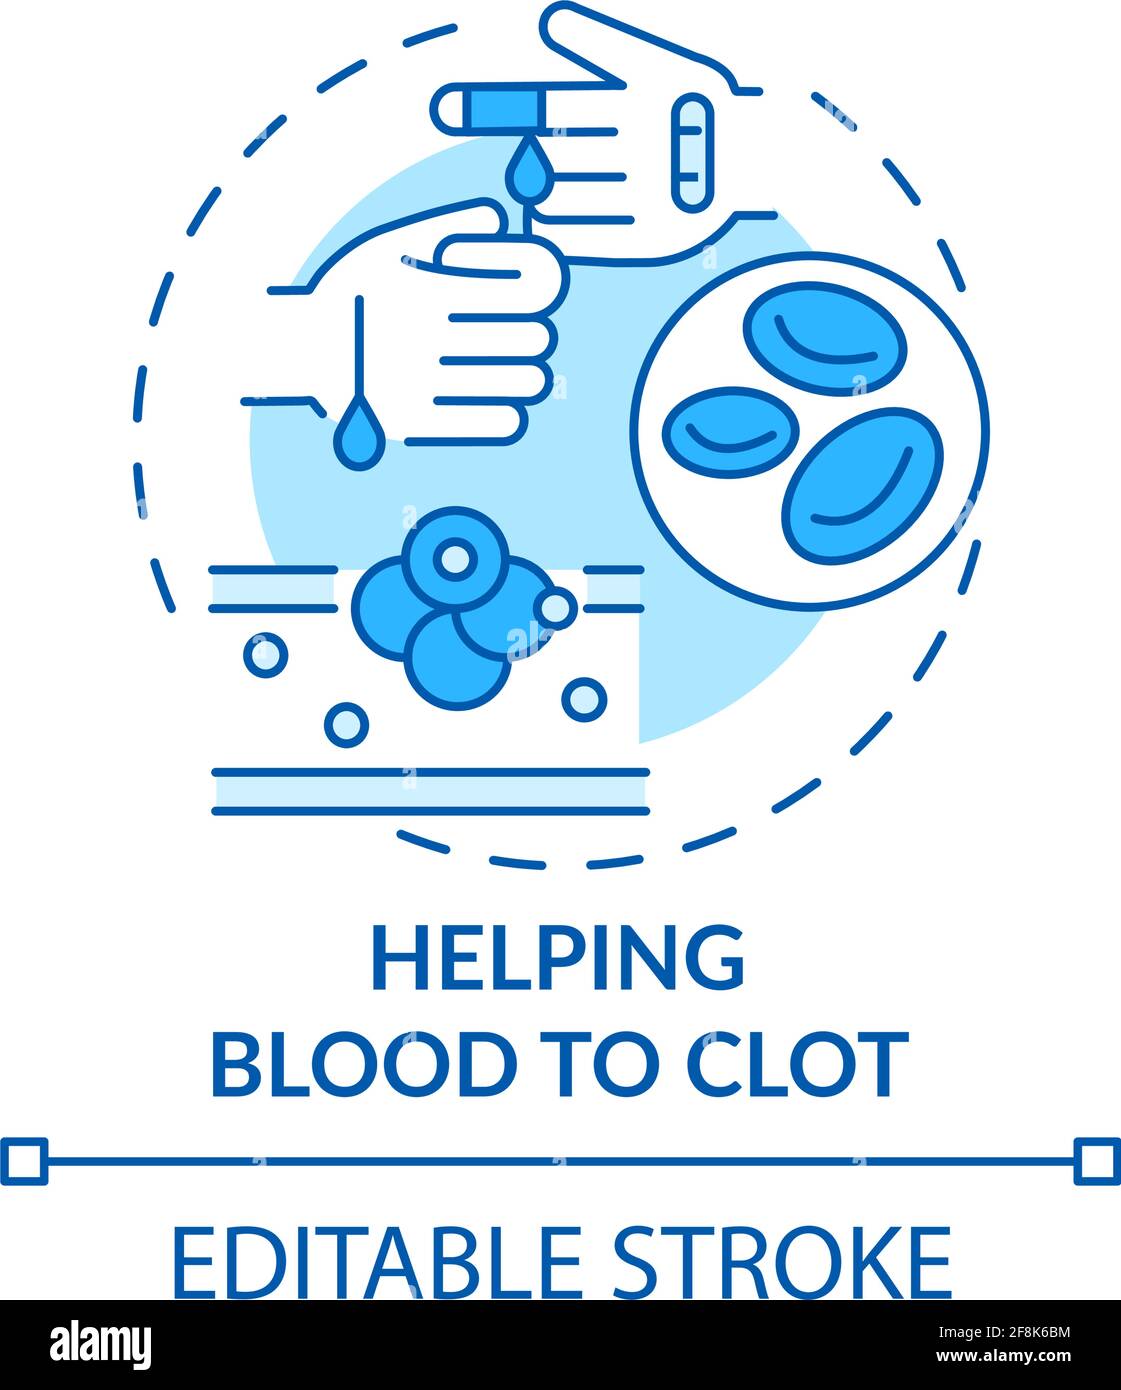 Helping blood to clot concept icon Stock Vector